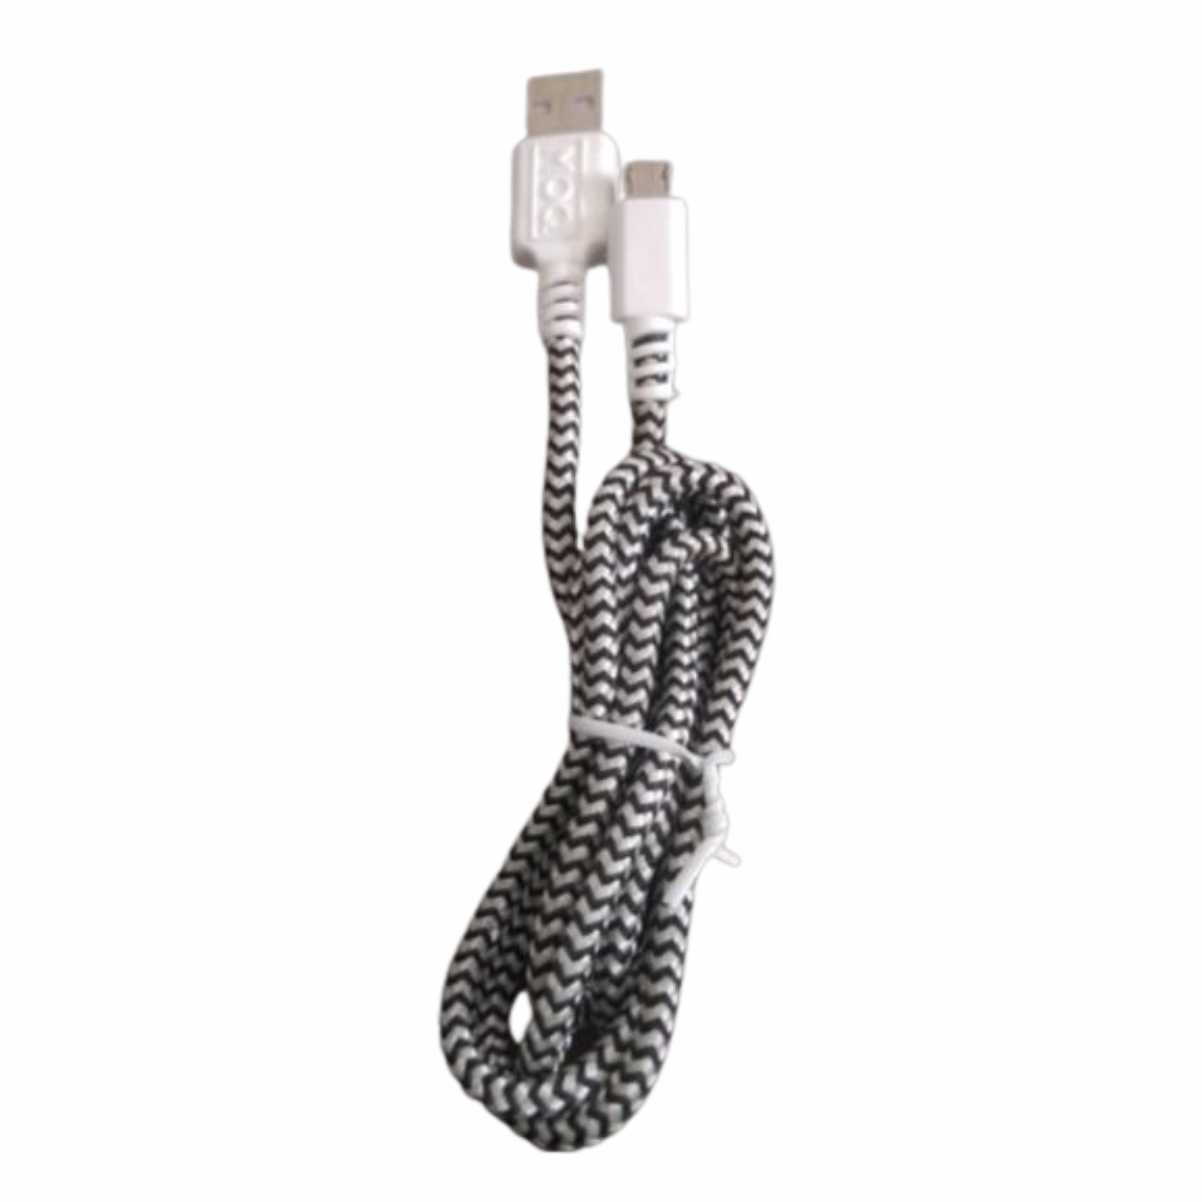 3 AMP MICRO USB CABLE FOR CHARGING AND DATA TRANSFER, BRAIDED